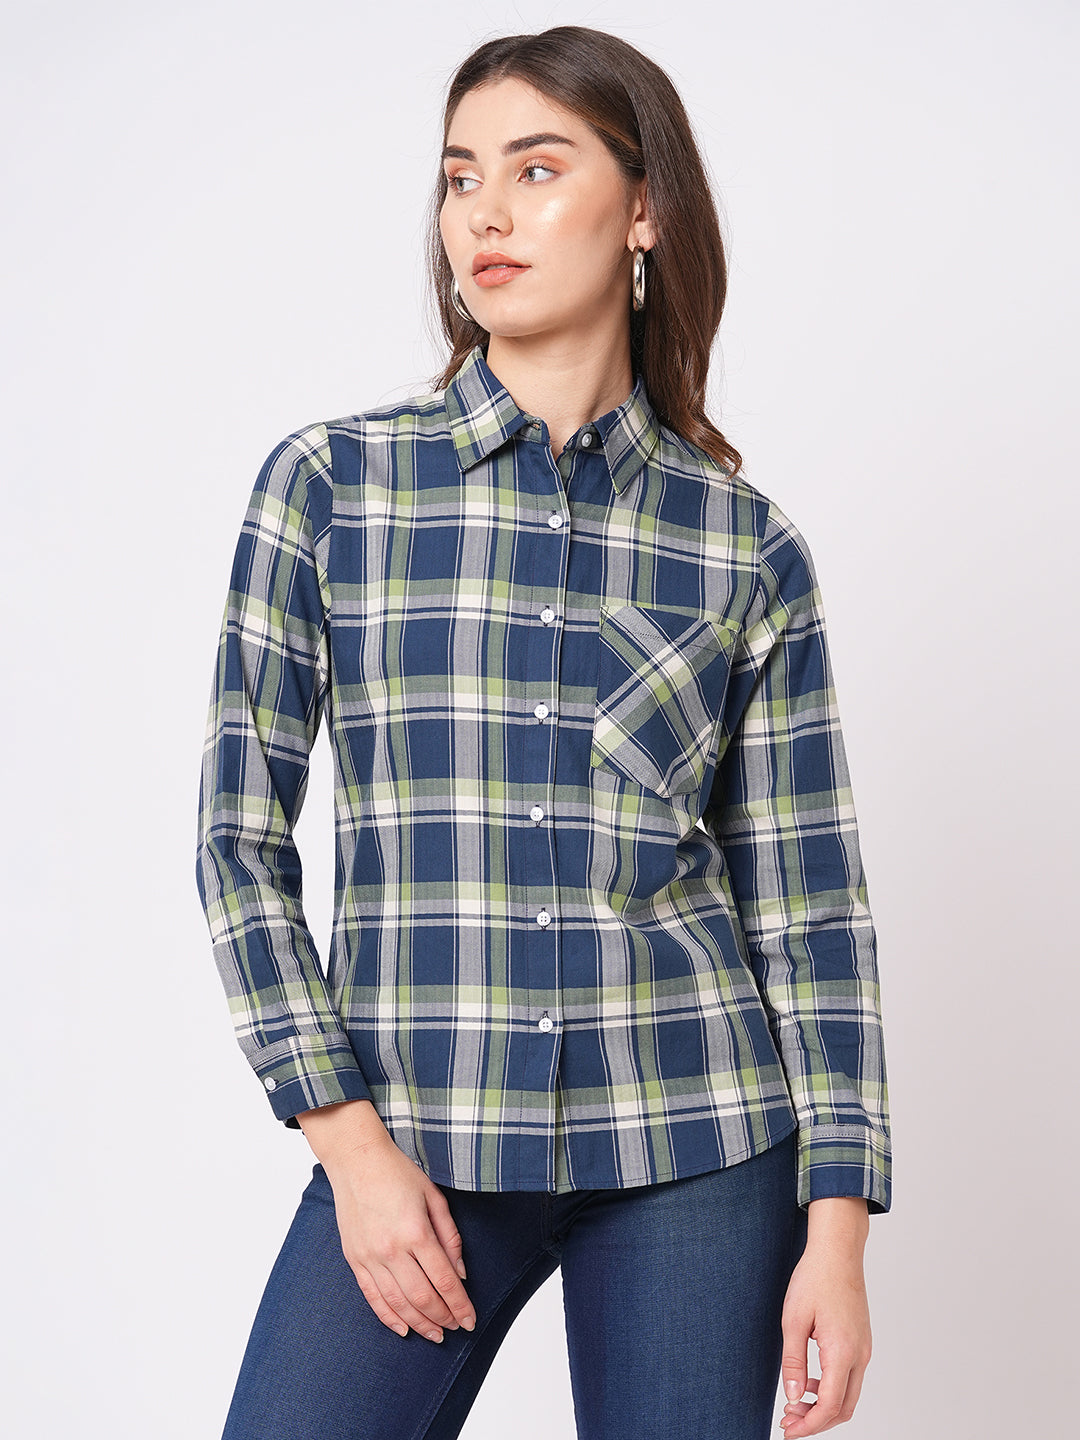 Bombay High Women's Dark Blue Chequered Relaxed Fit Full Sleeves Shirt